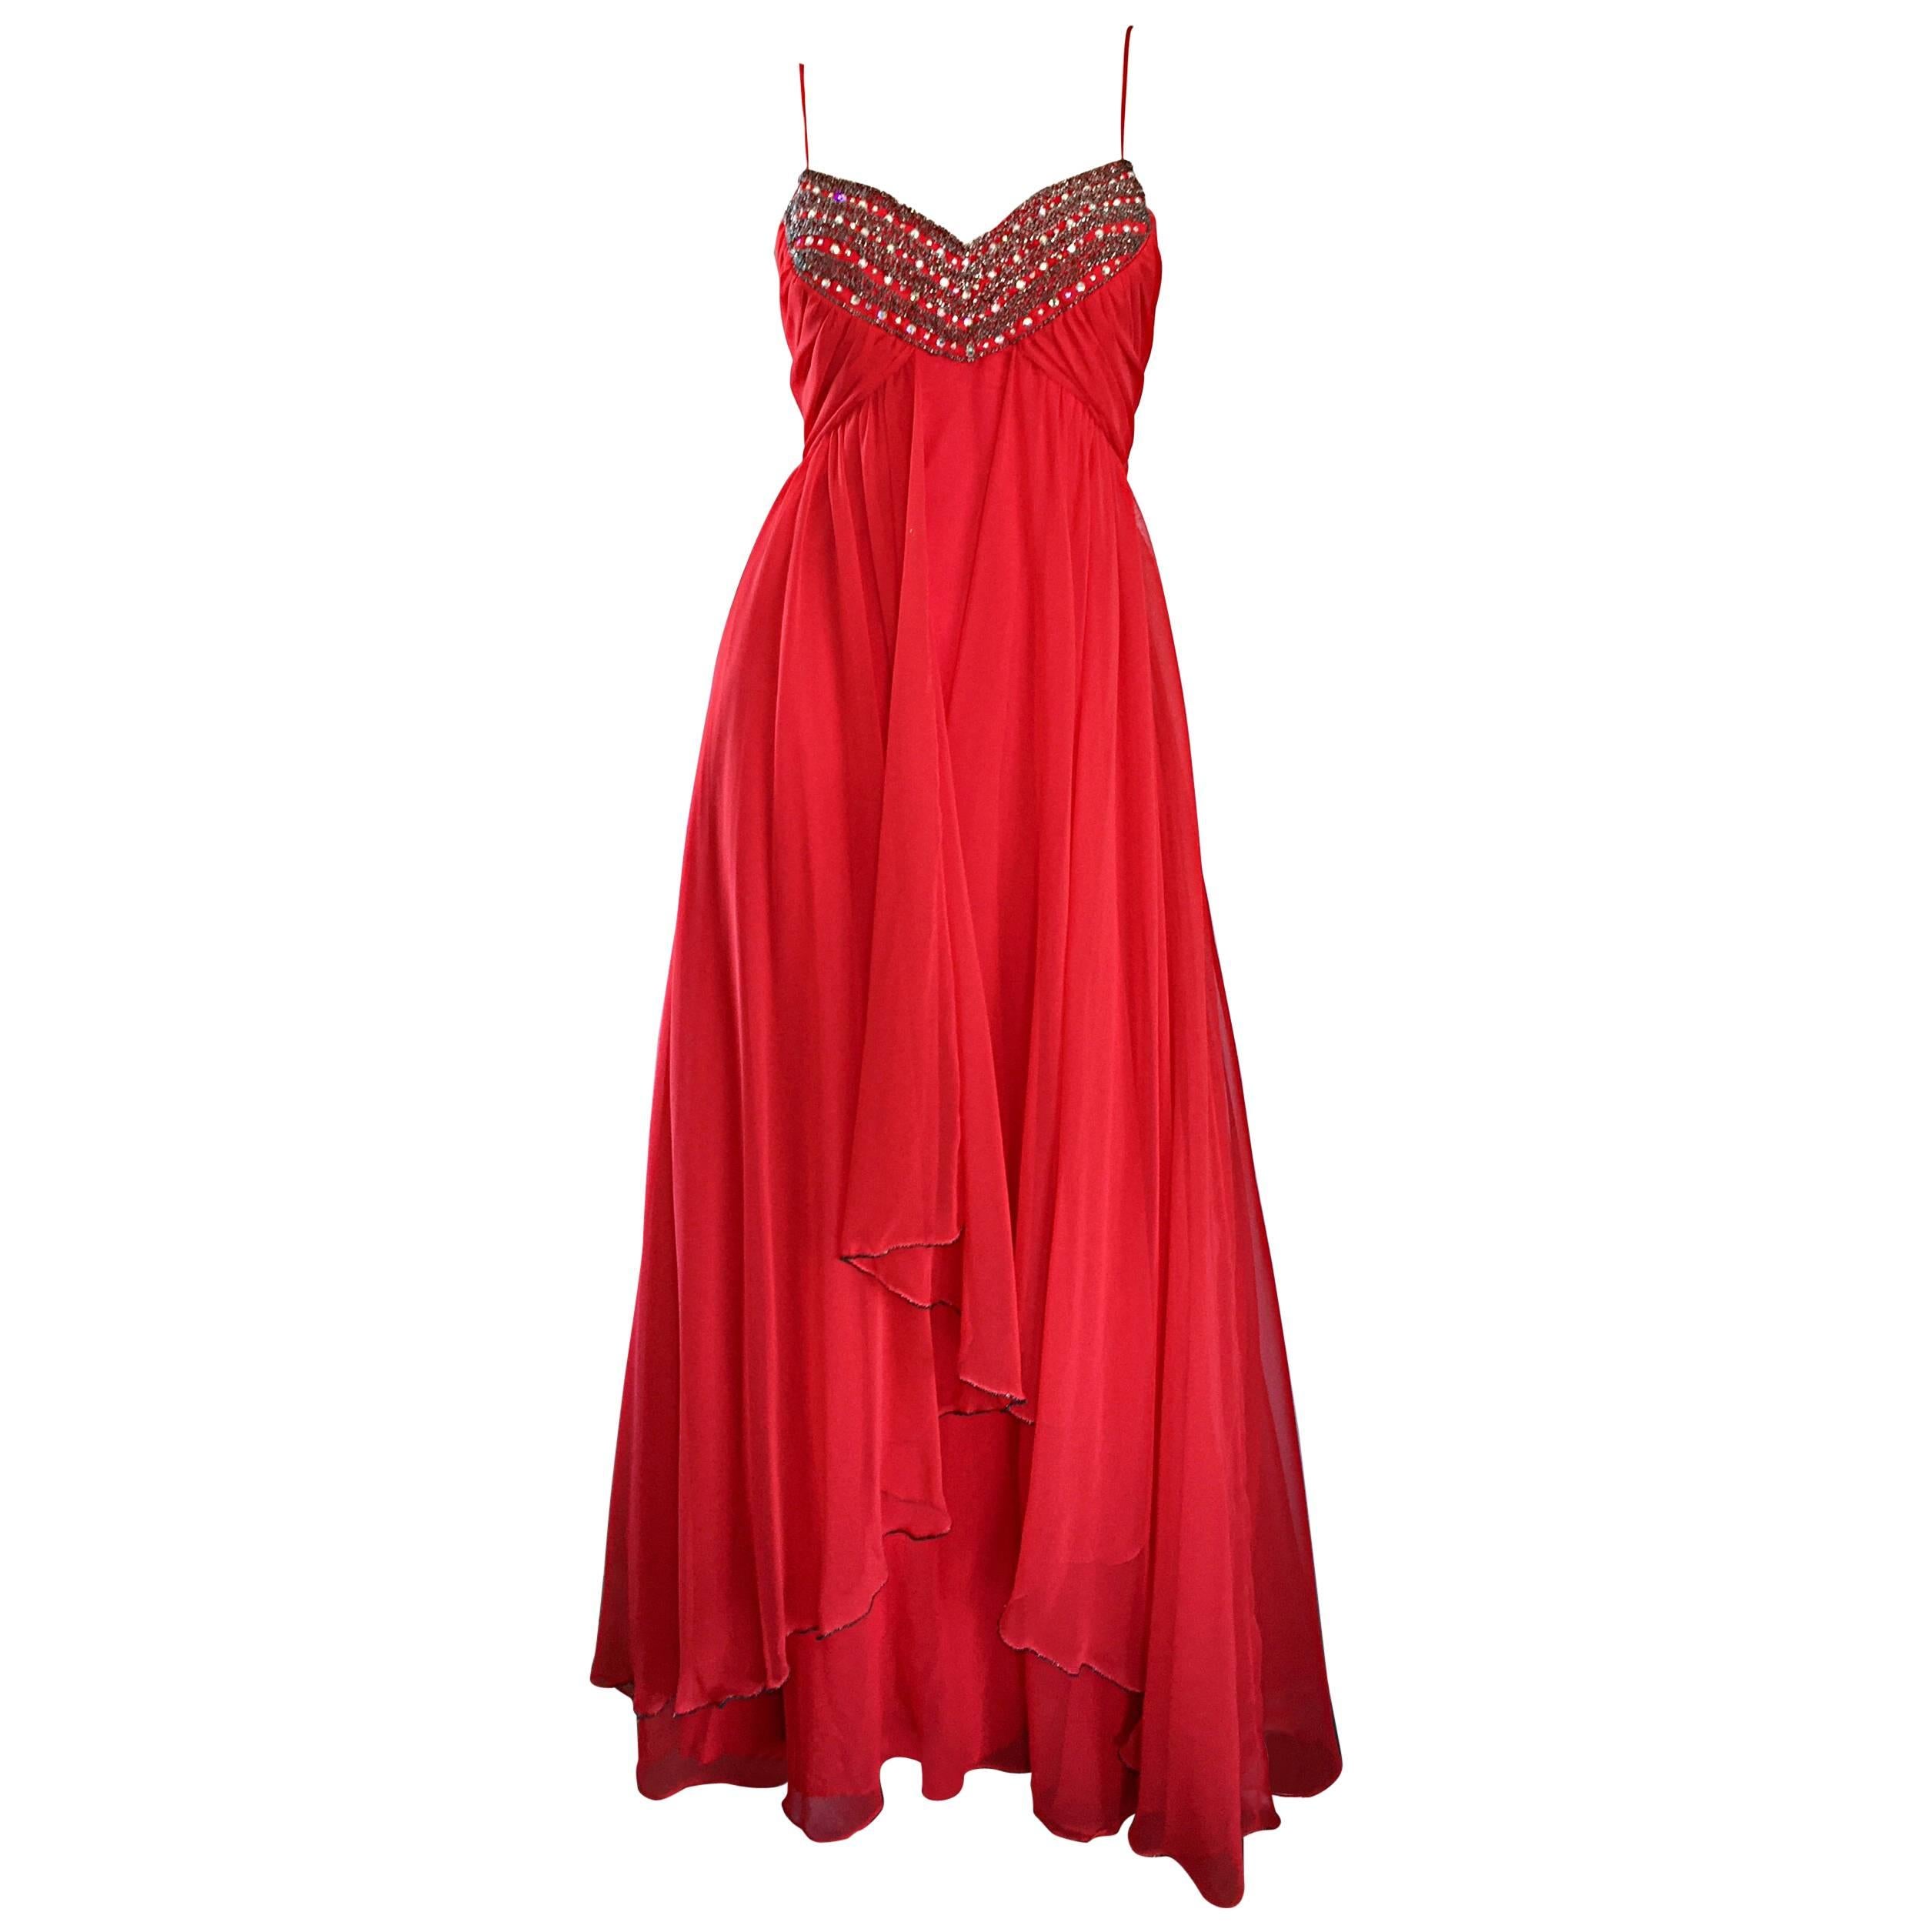 Exquisite 1970s Lipstick Red Chiffon Rhinestone Beaded Vintage 70s Goddess Gown  For Sale